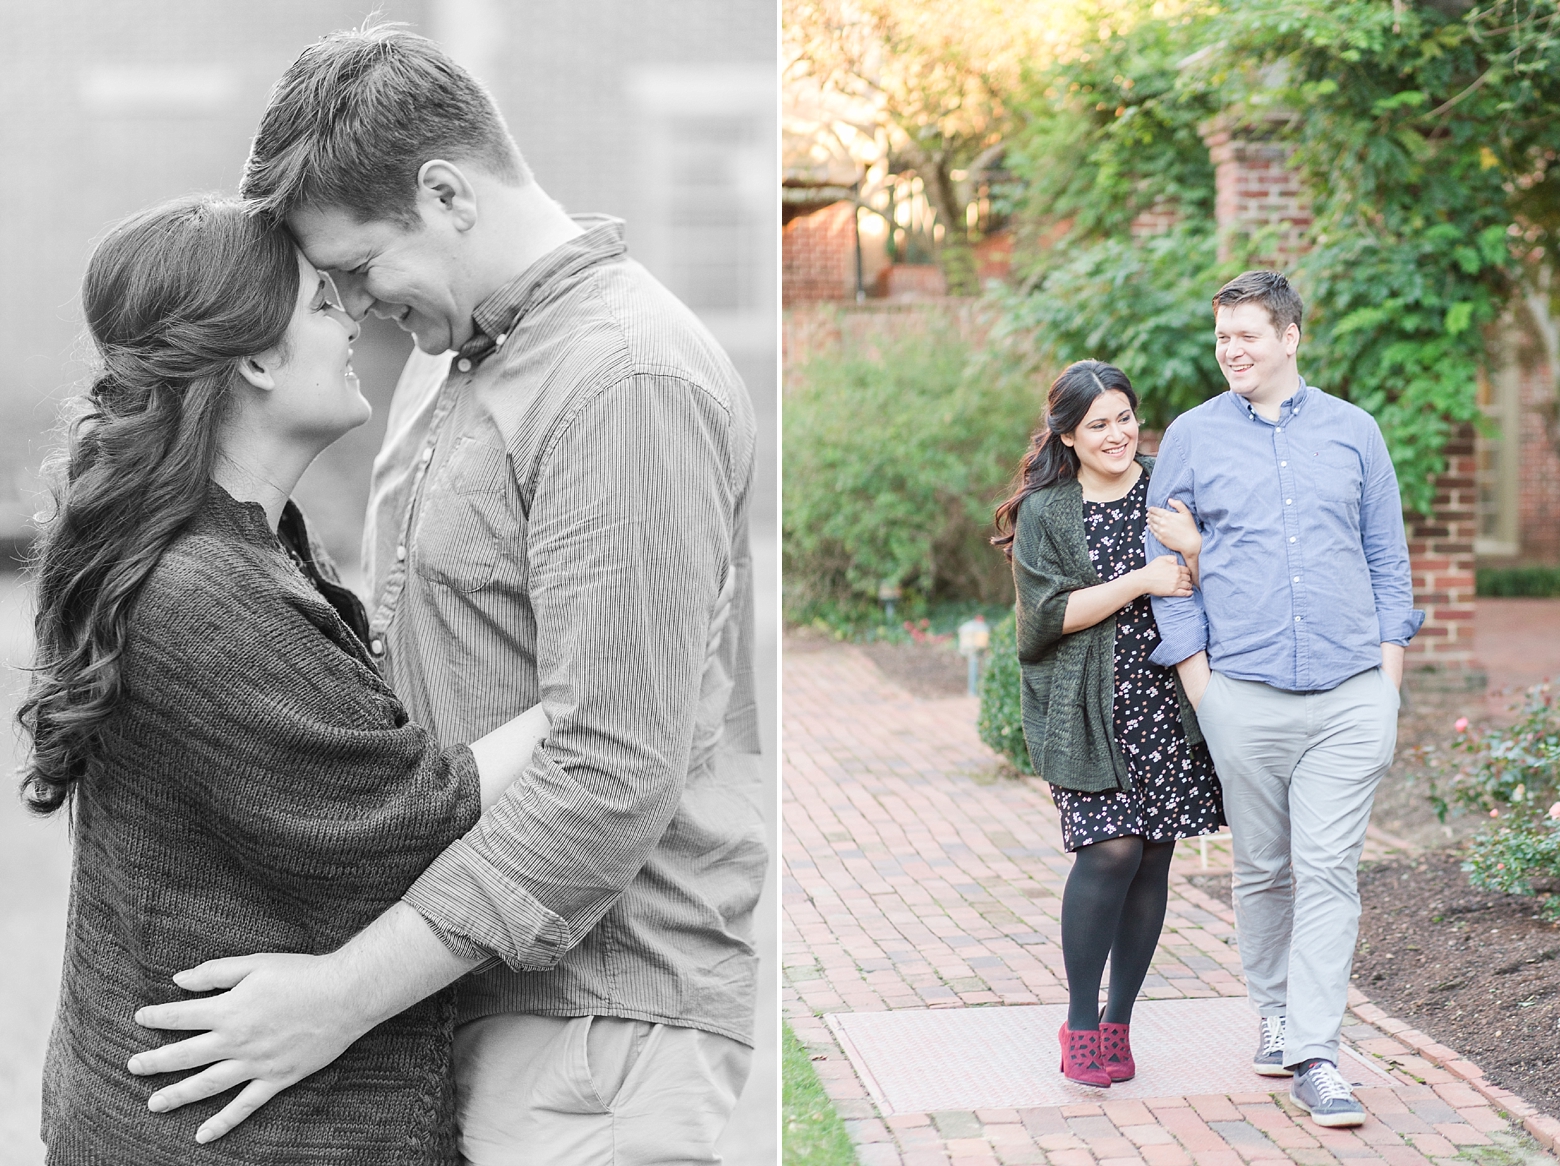 Williamsburg Engagement Photography by Angie McPherson Photography